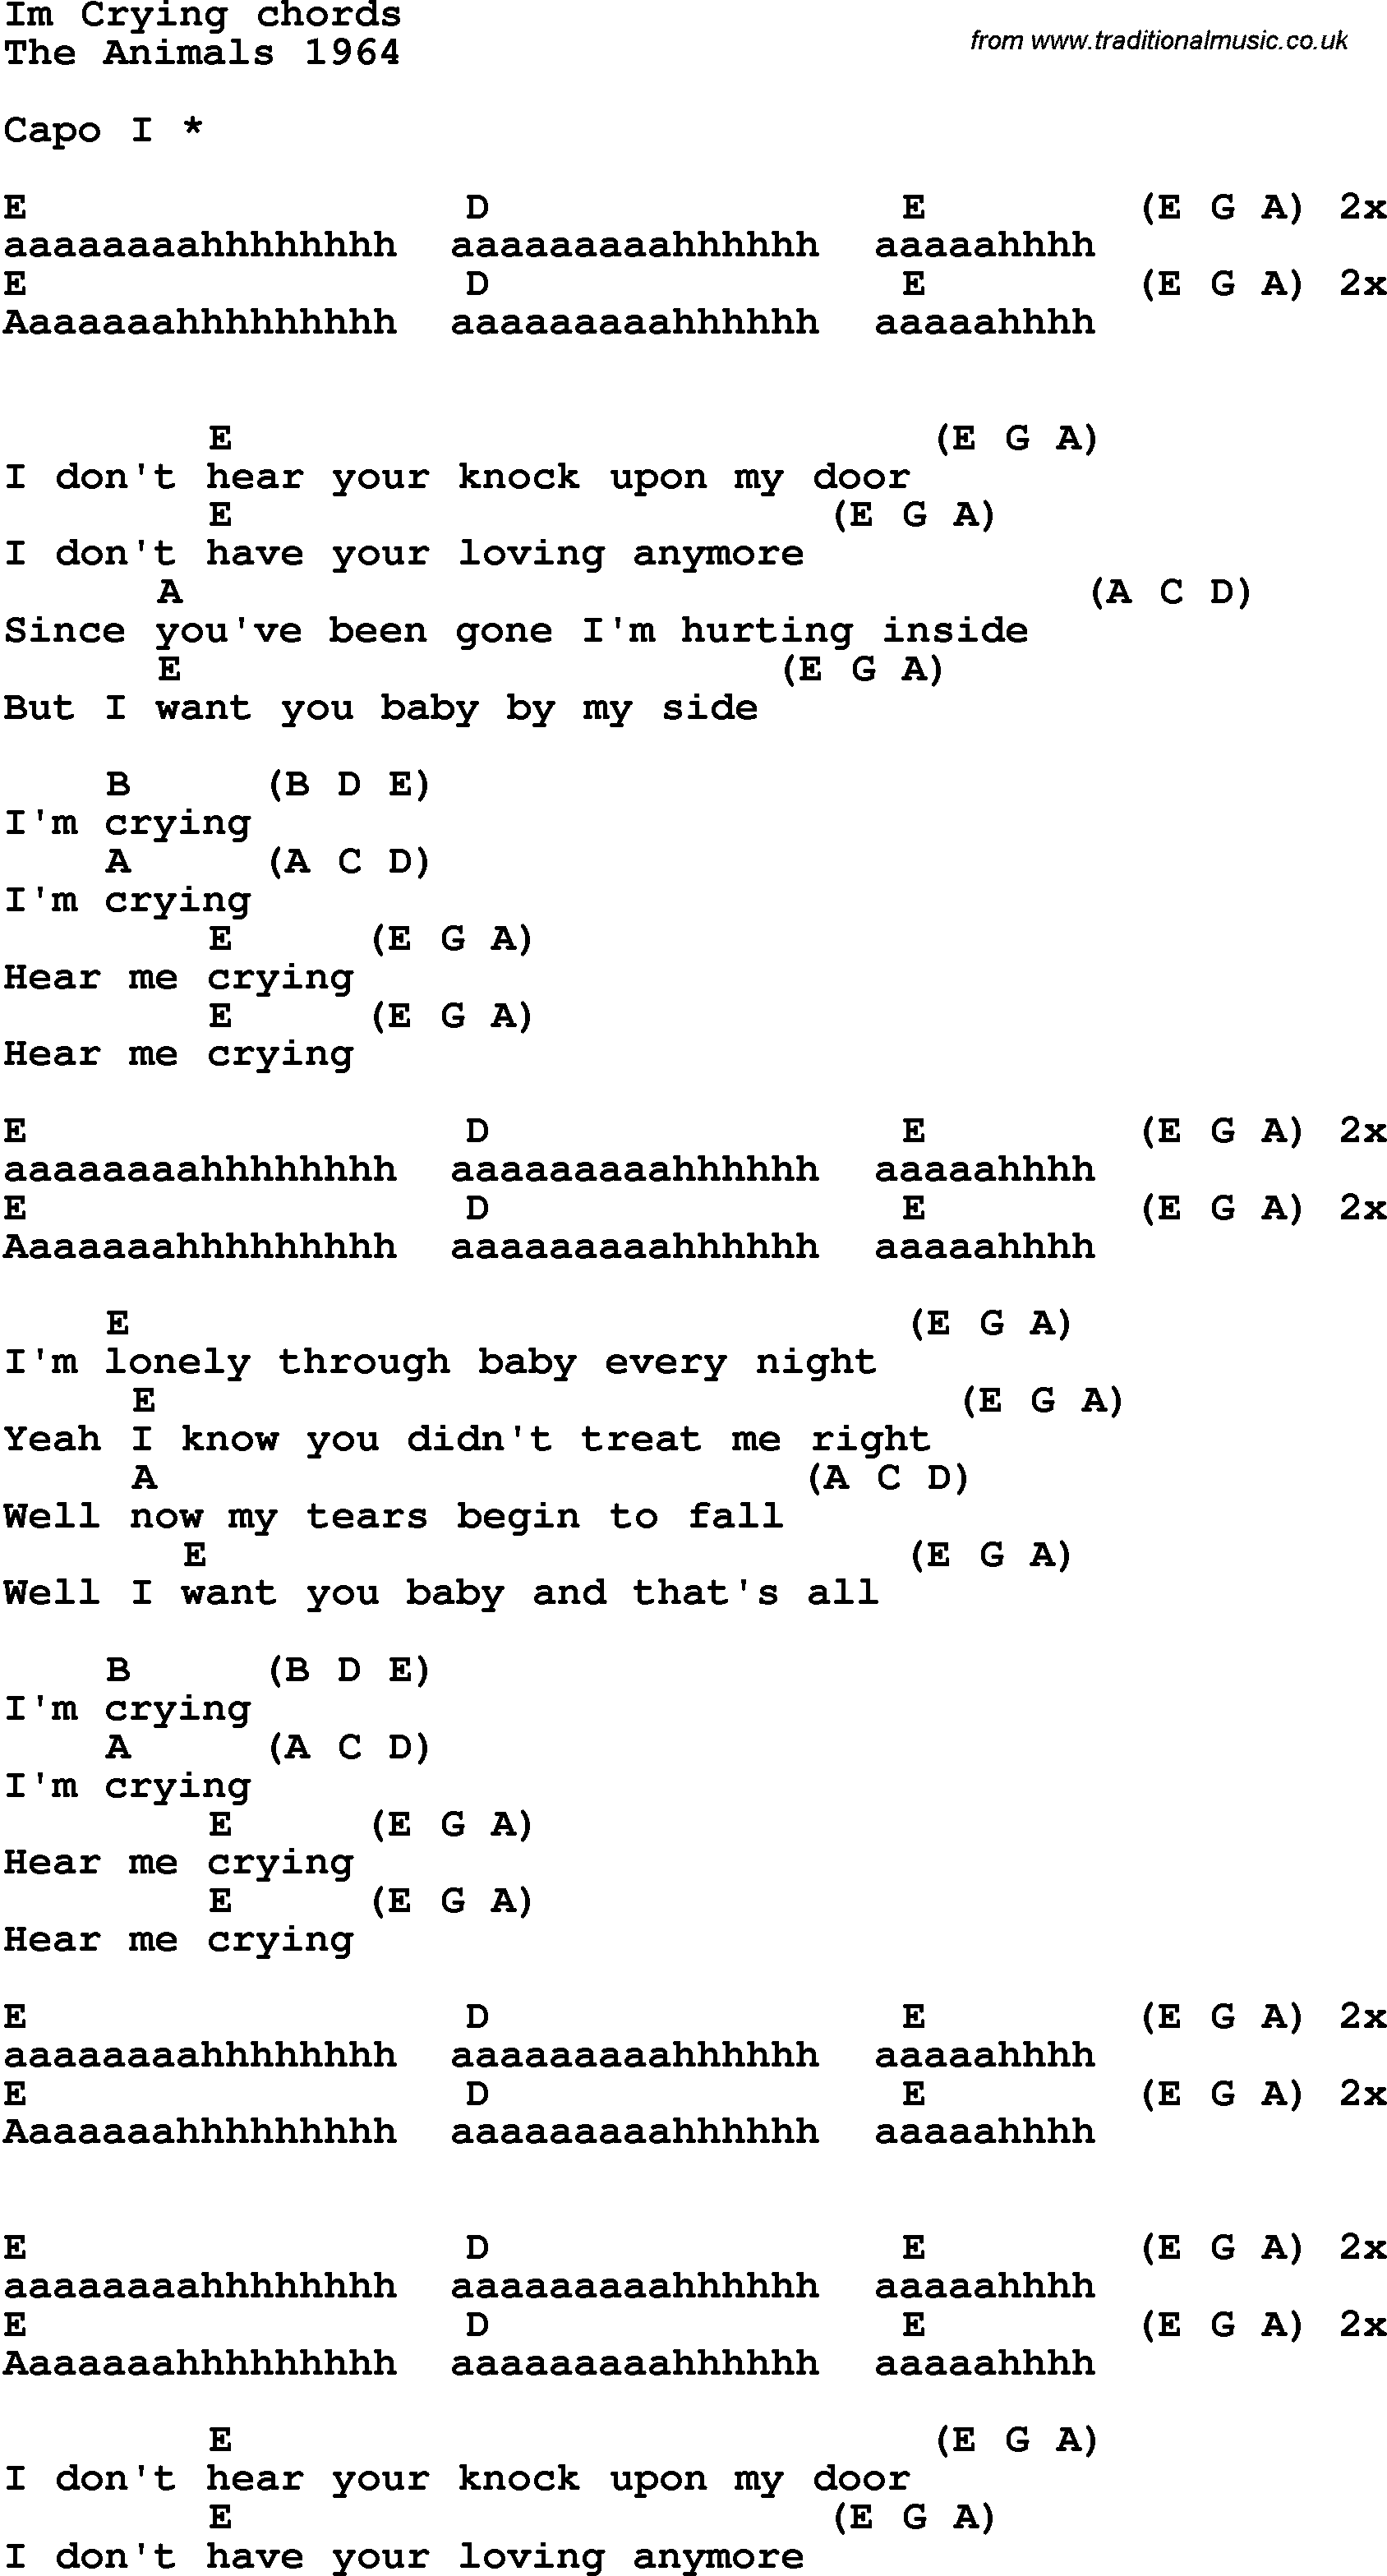 Song Lyrics with guitar chords for Im Crying